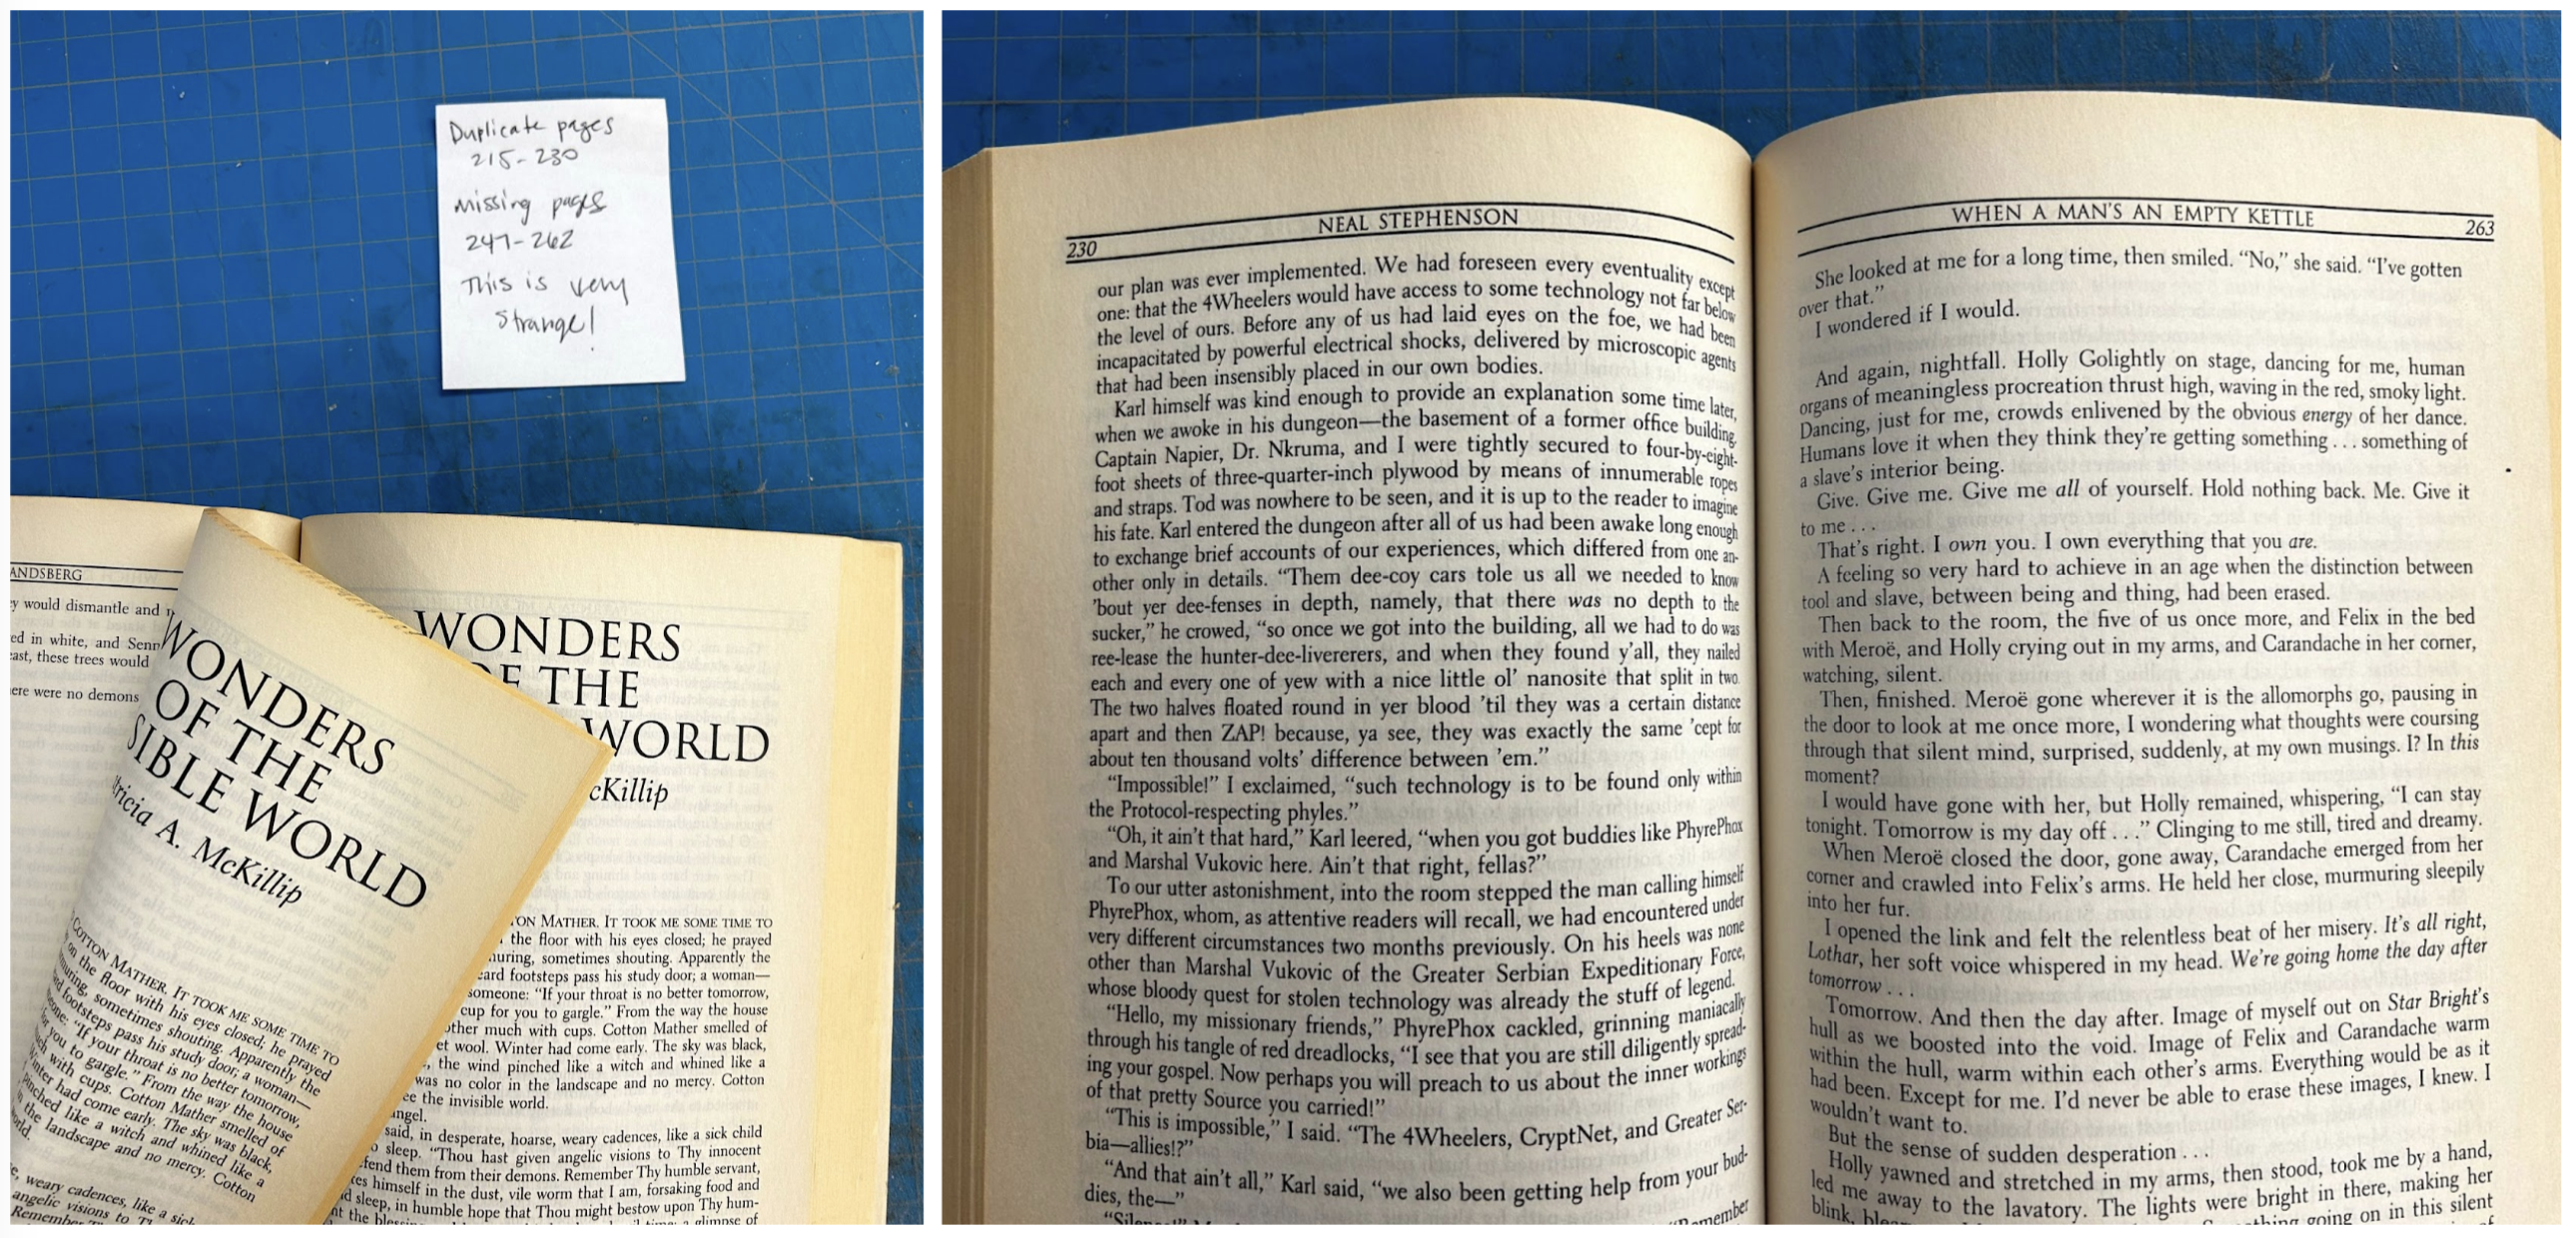 A publisher’s error resulted in this book being bound without pages 247-262.